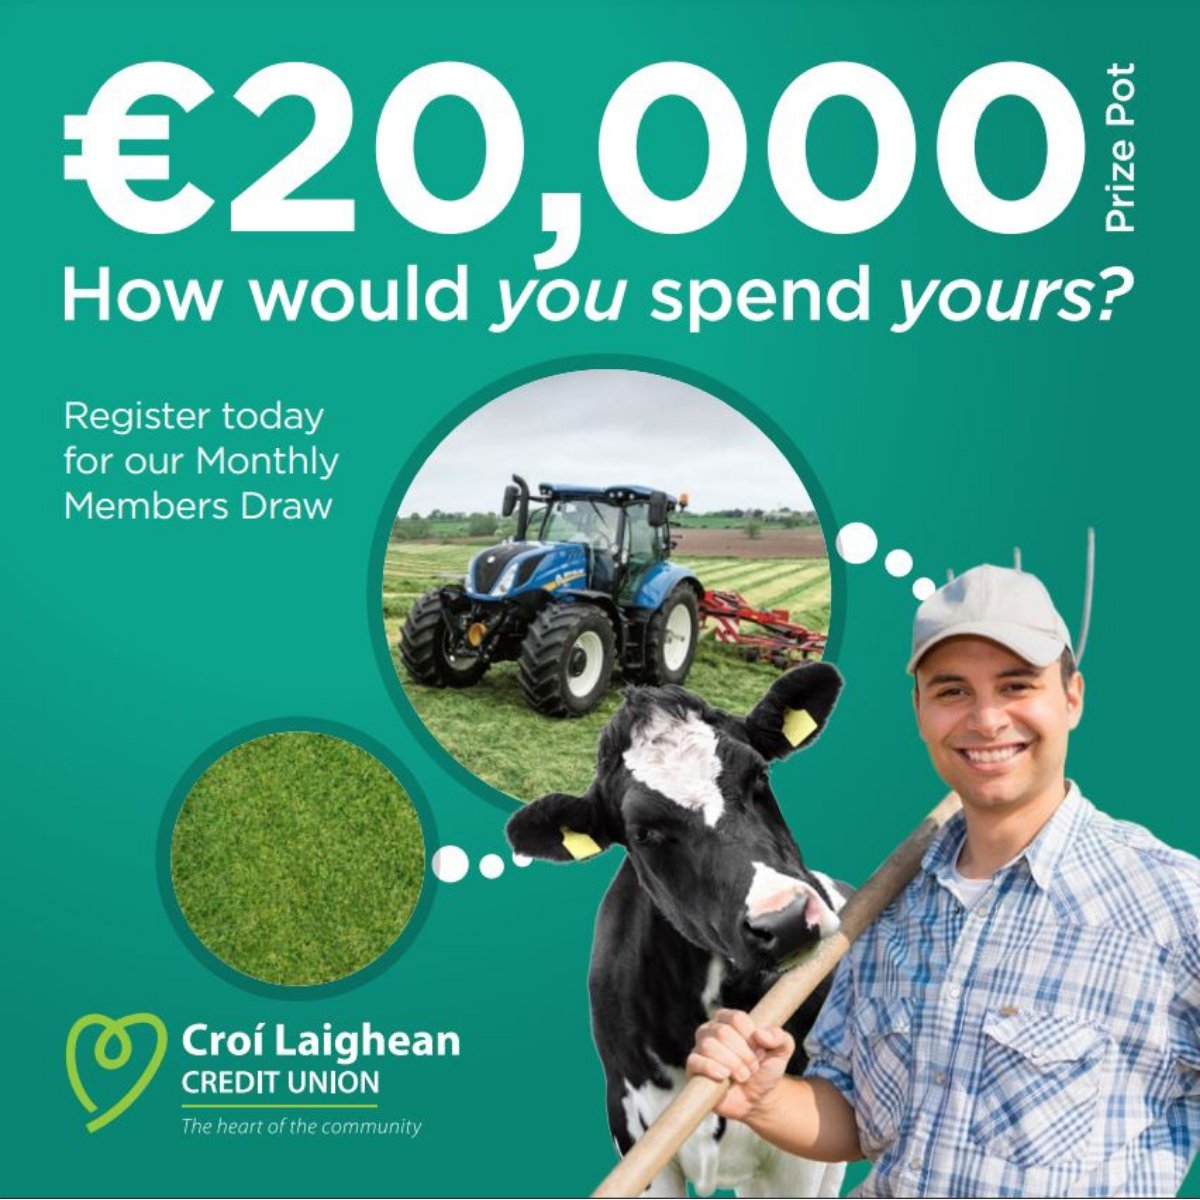 Our Members Draw takes place next week! Every month, five lucky Members get the chance to share a prize pot of €20,000! 🙌 Even better, at just 67 cents per week - it costs less than a cup of coffee to enter! Learn how to register: bit.ly/3KE3YK5 #MembersDraw #Ad